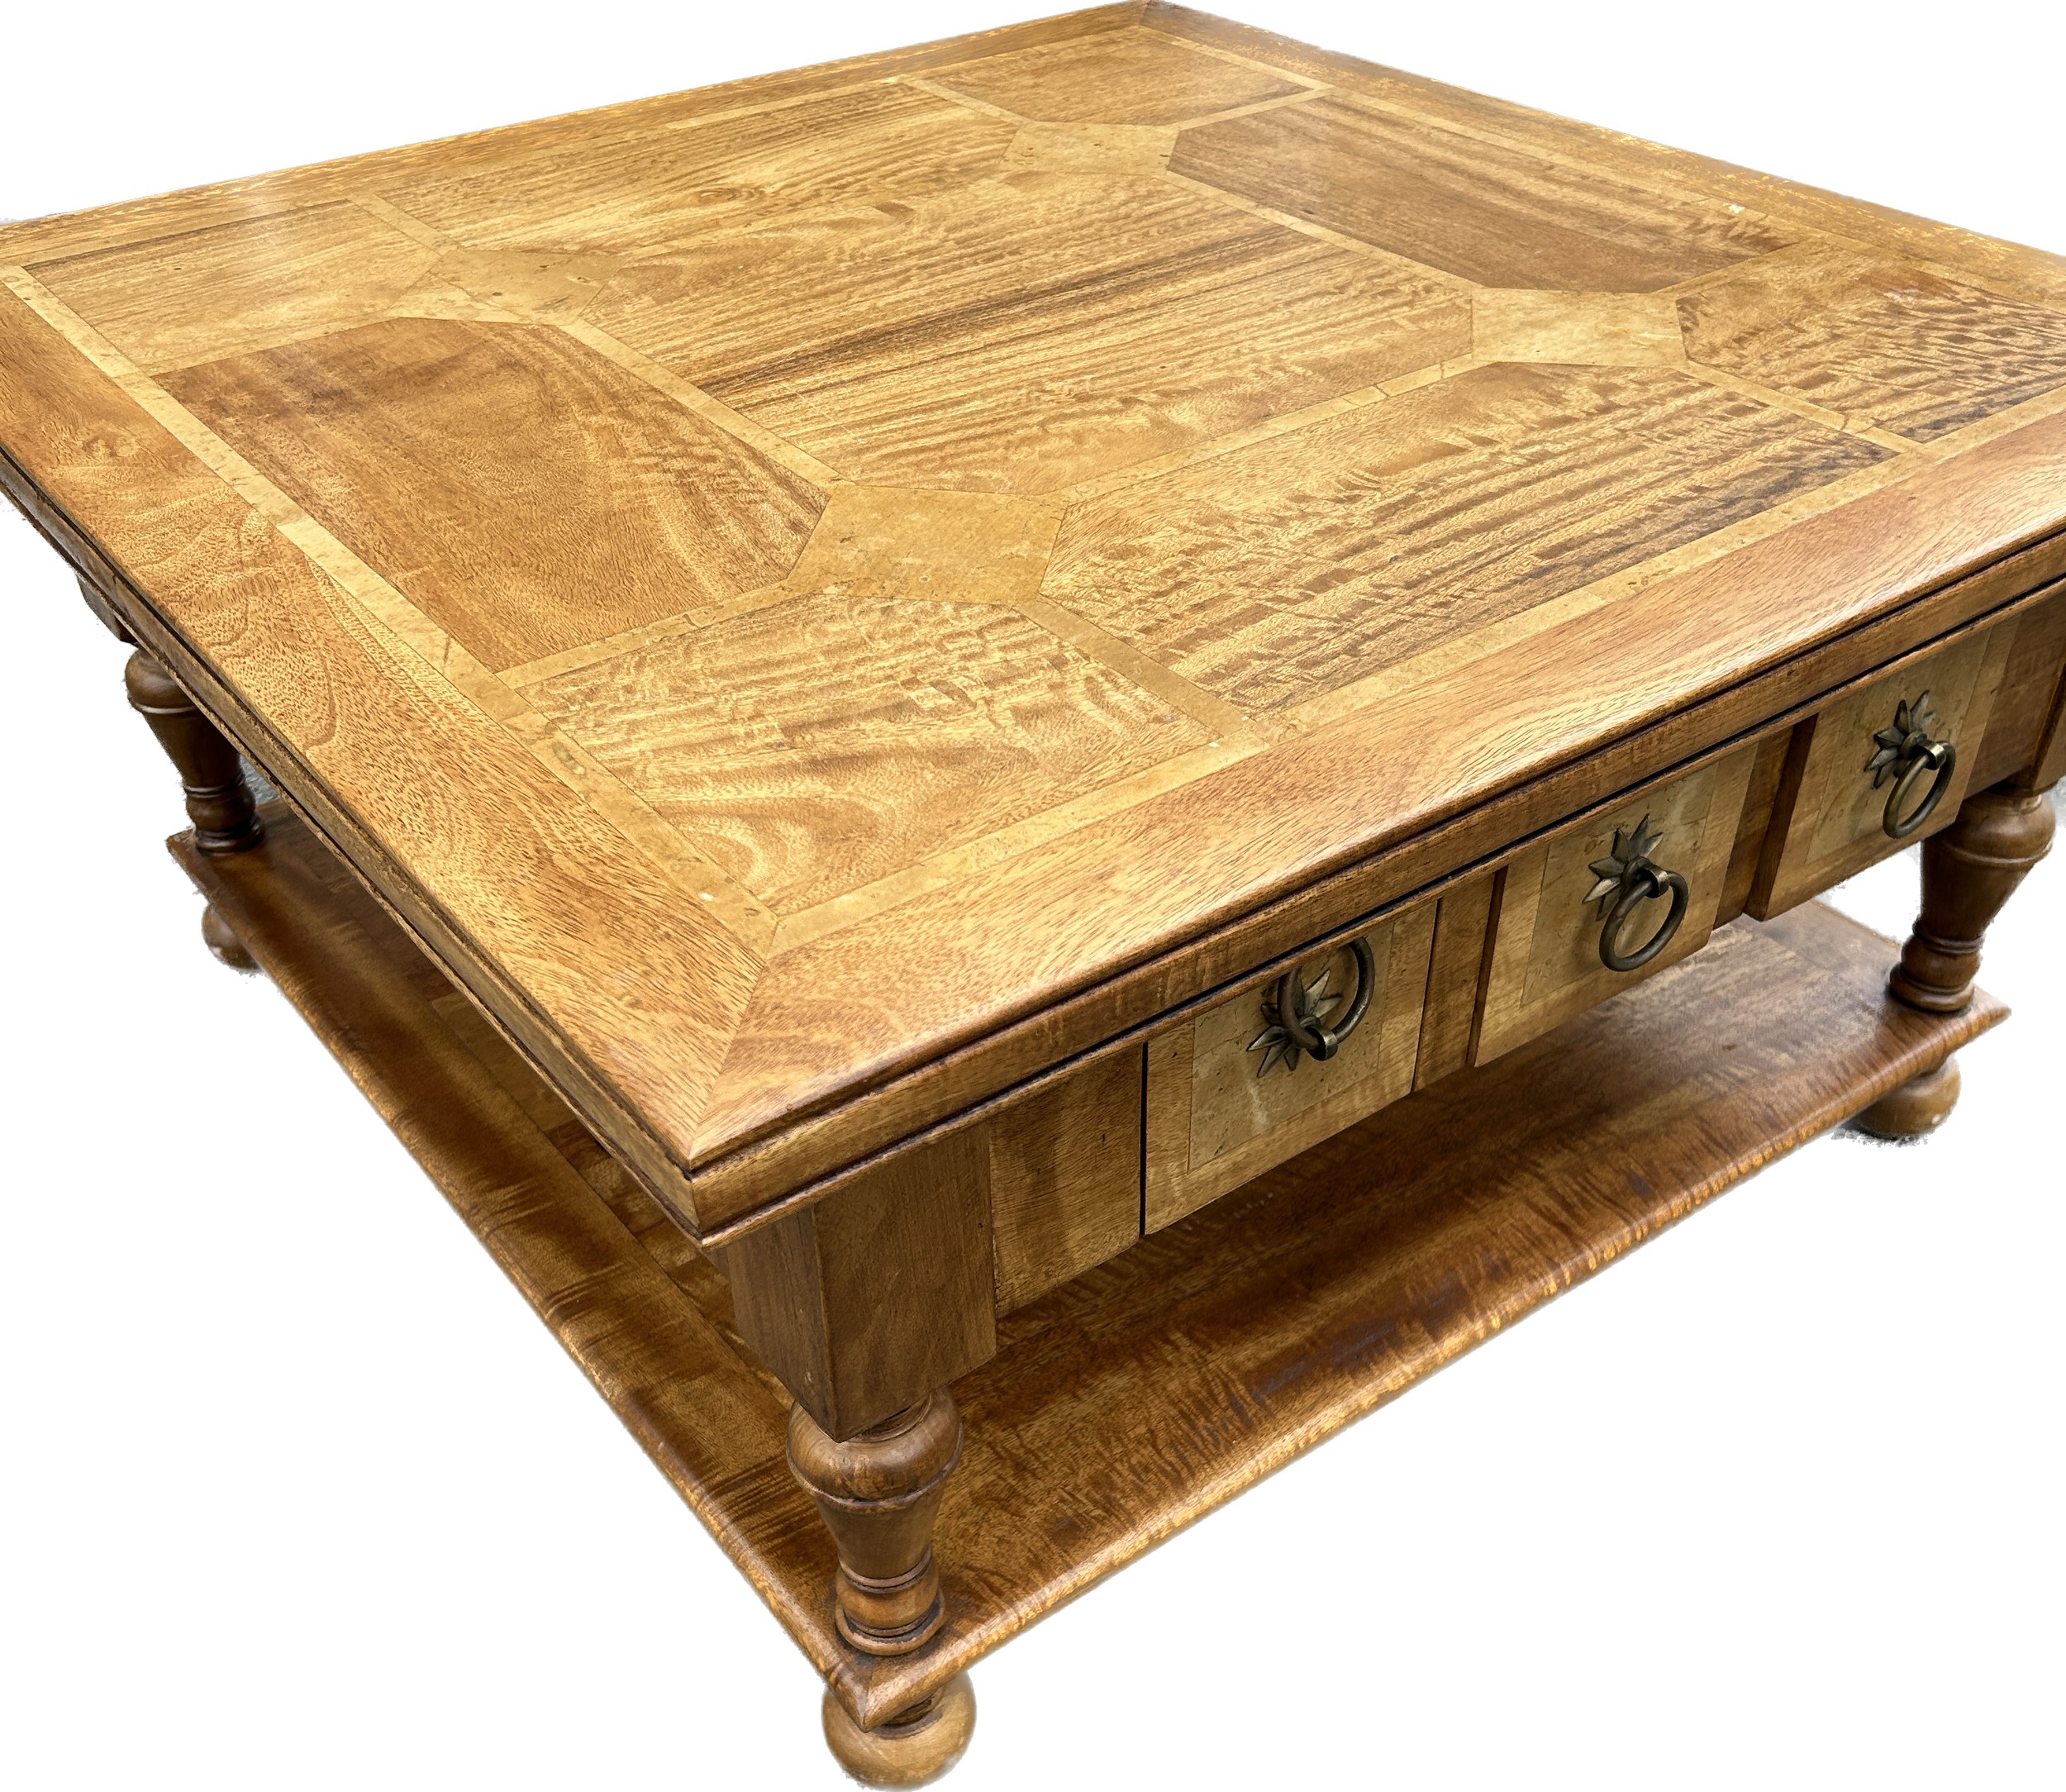 6 Drawer 2 tier large square inlaid coffee table, approximate measurements: 36 inches square, Height - Image 2 of 3